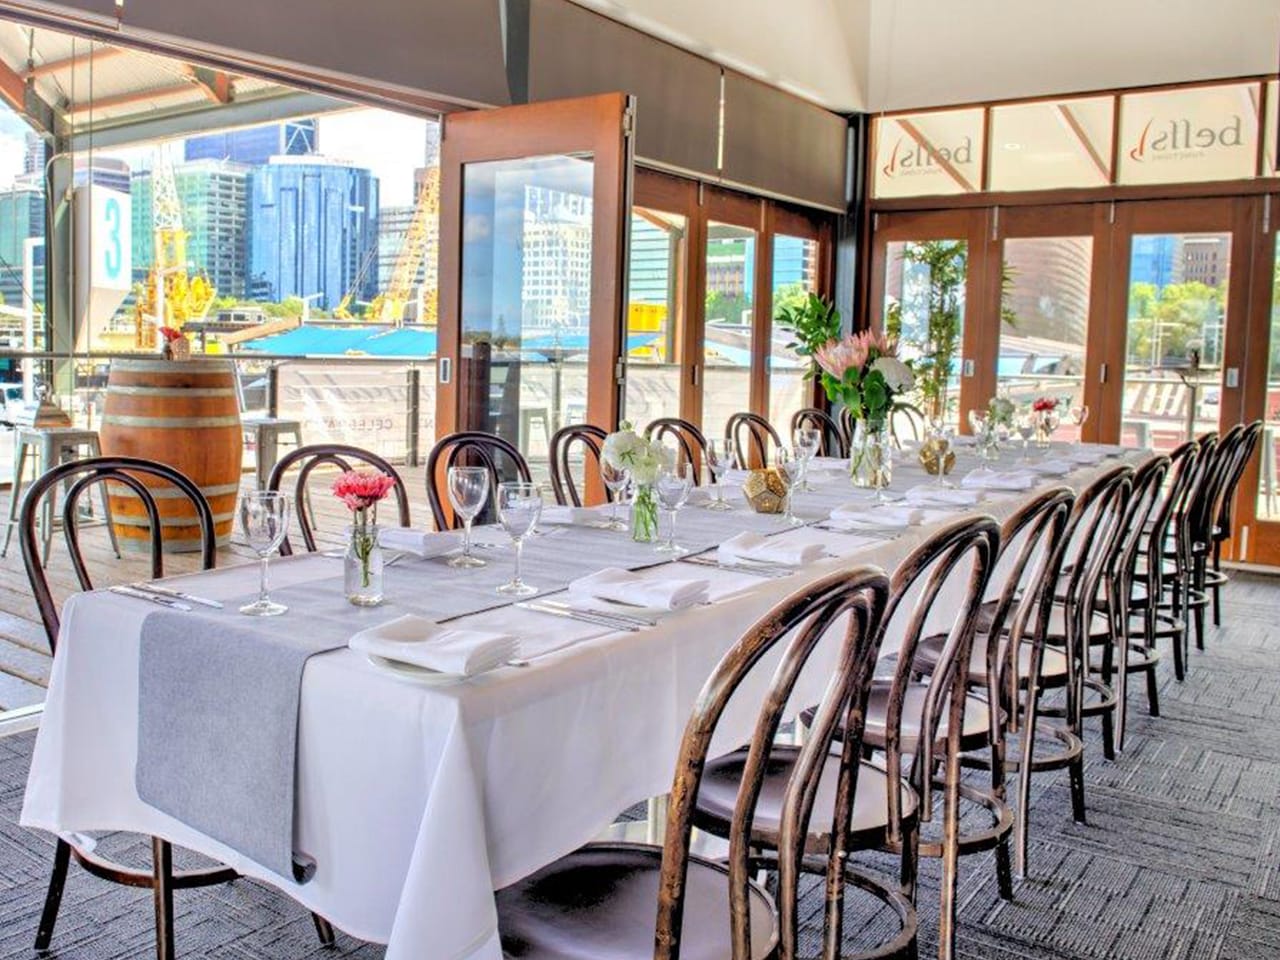 Chairs And Long Tables Setup For An Event Inside The Function Venue Perth With Glass Windows And A Balcony Behind